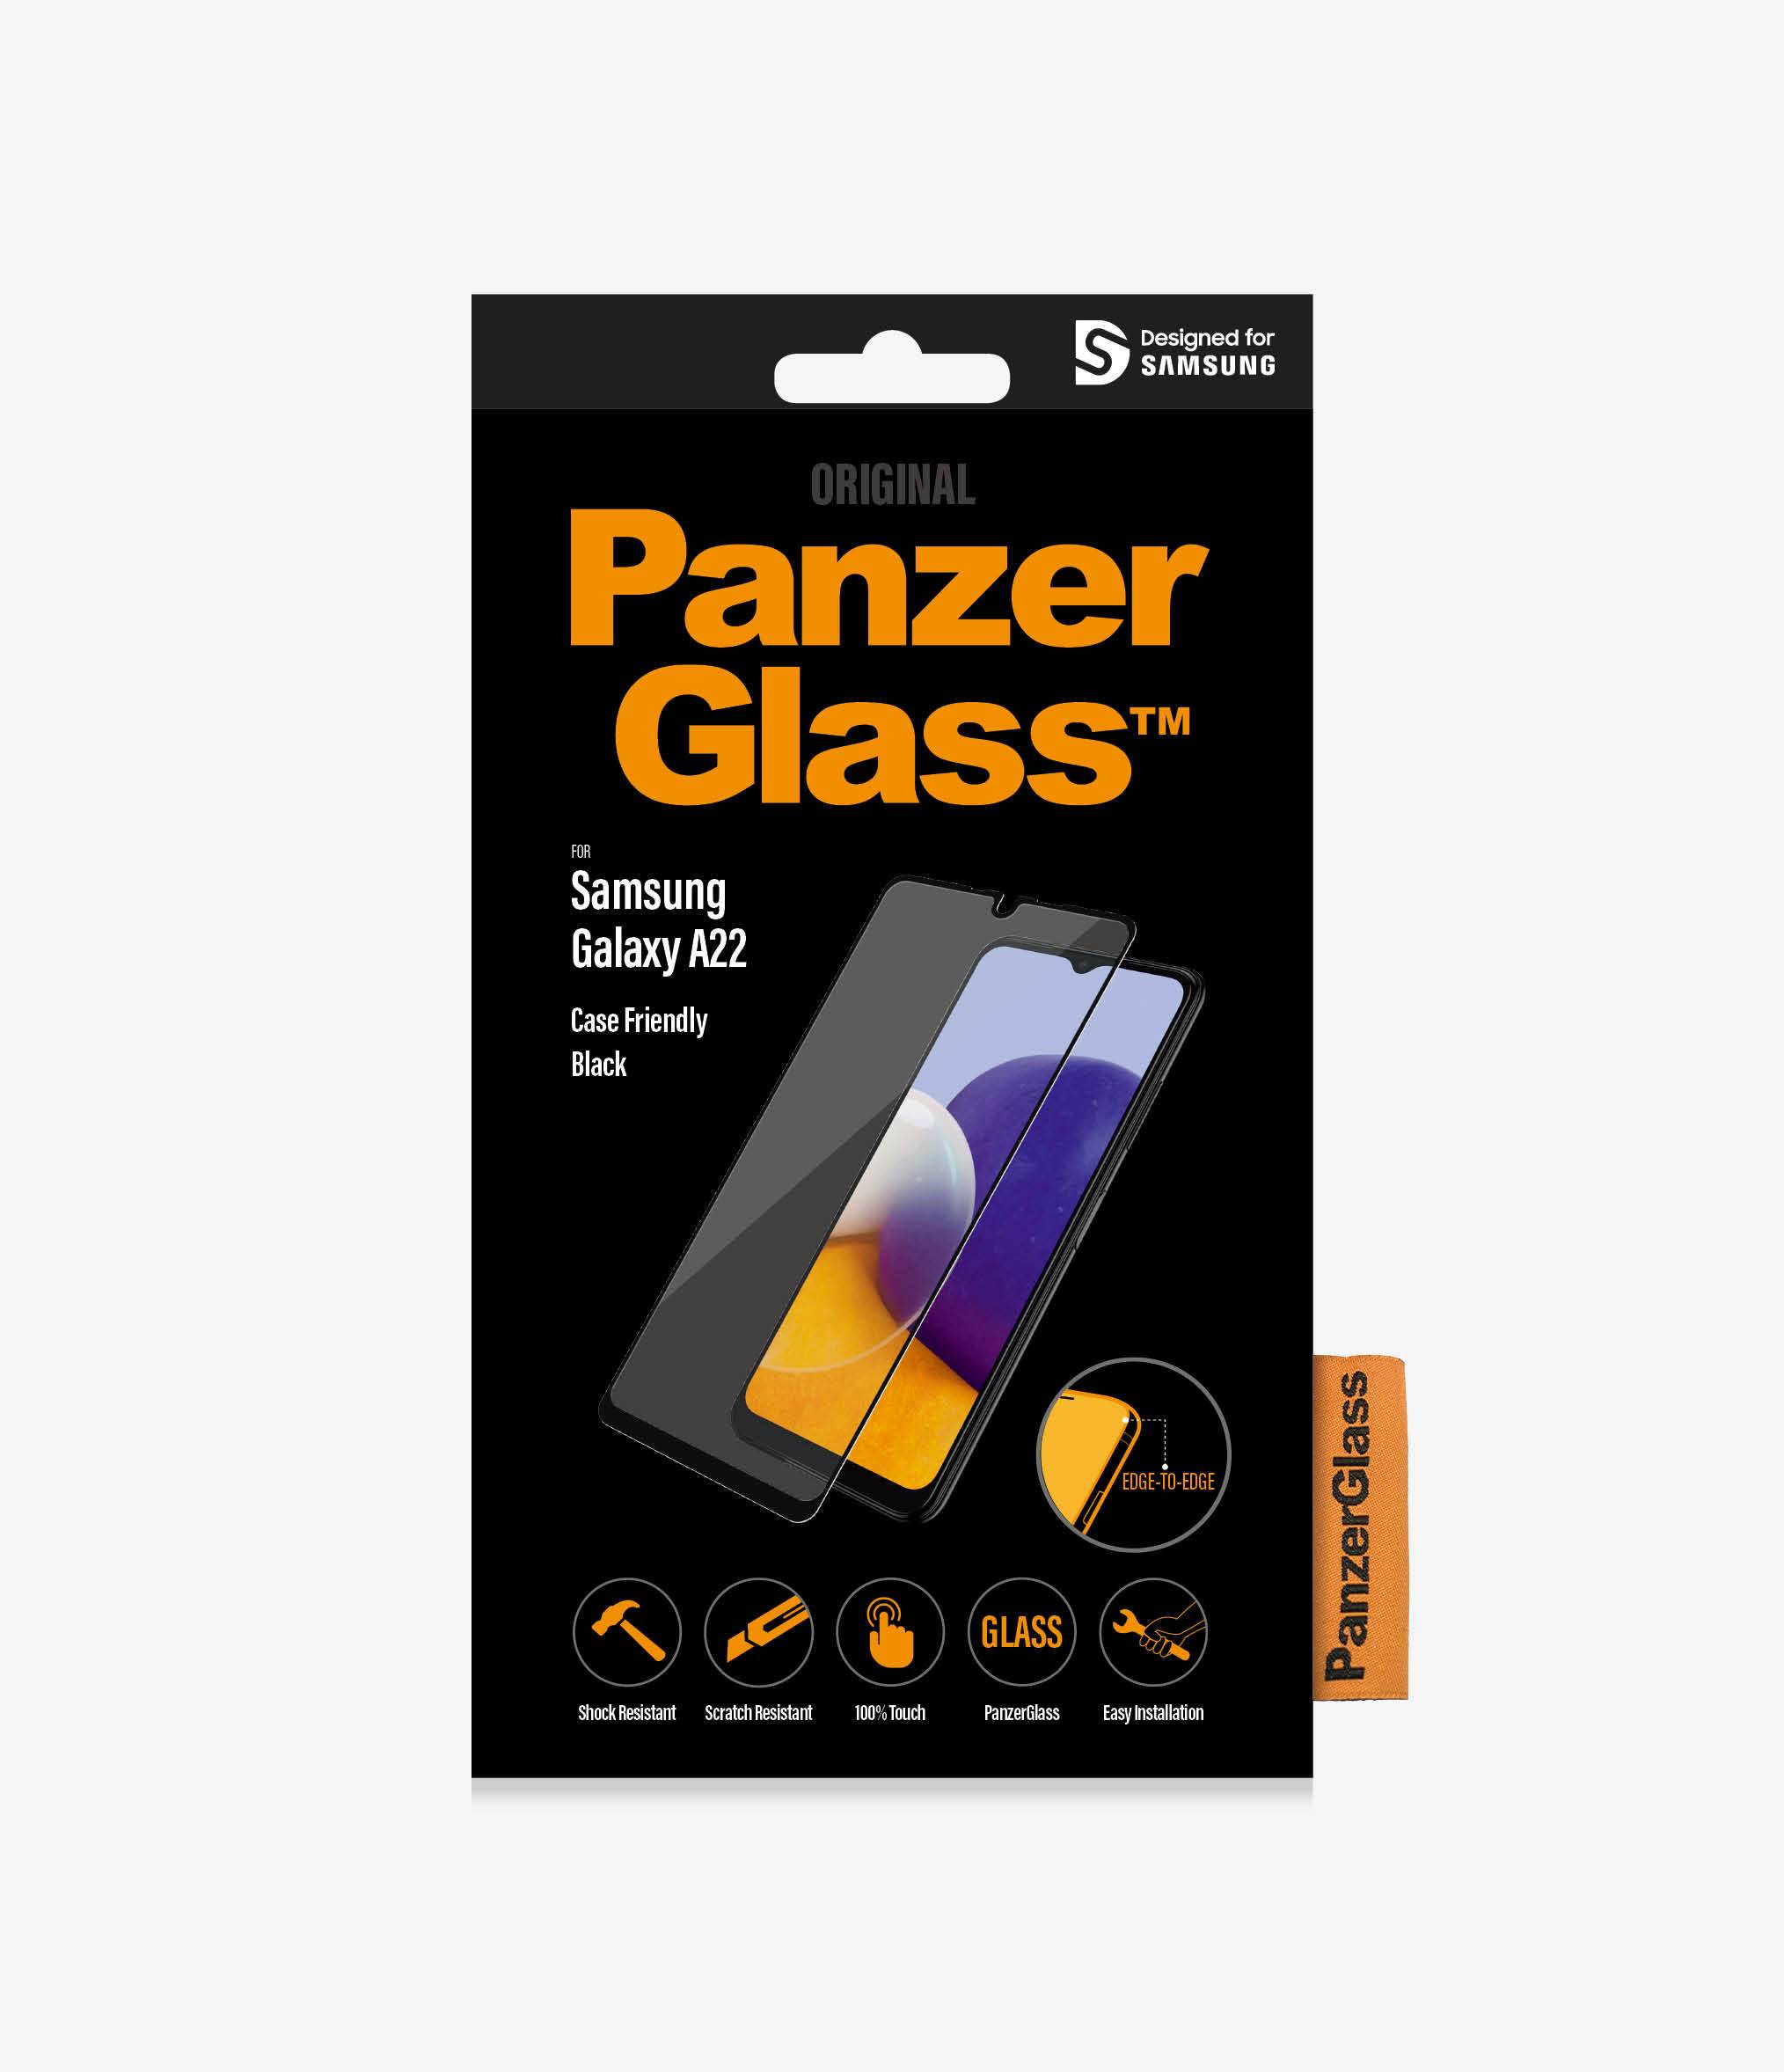 PanzerGlass™ Samsung Galaxy A22 - Clear glass (7278) - Screen Protector - Full frame coverage, Rounded edges, Crystal clear, 100% touch preservation